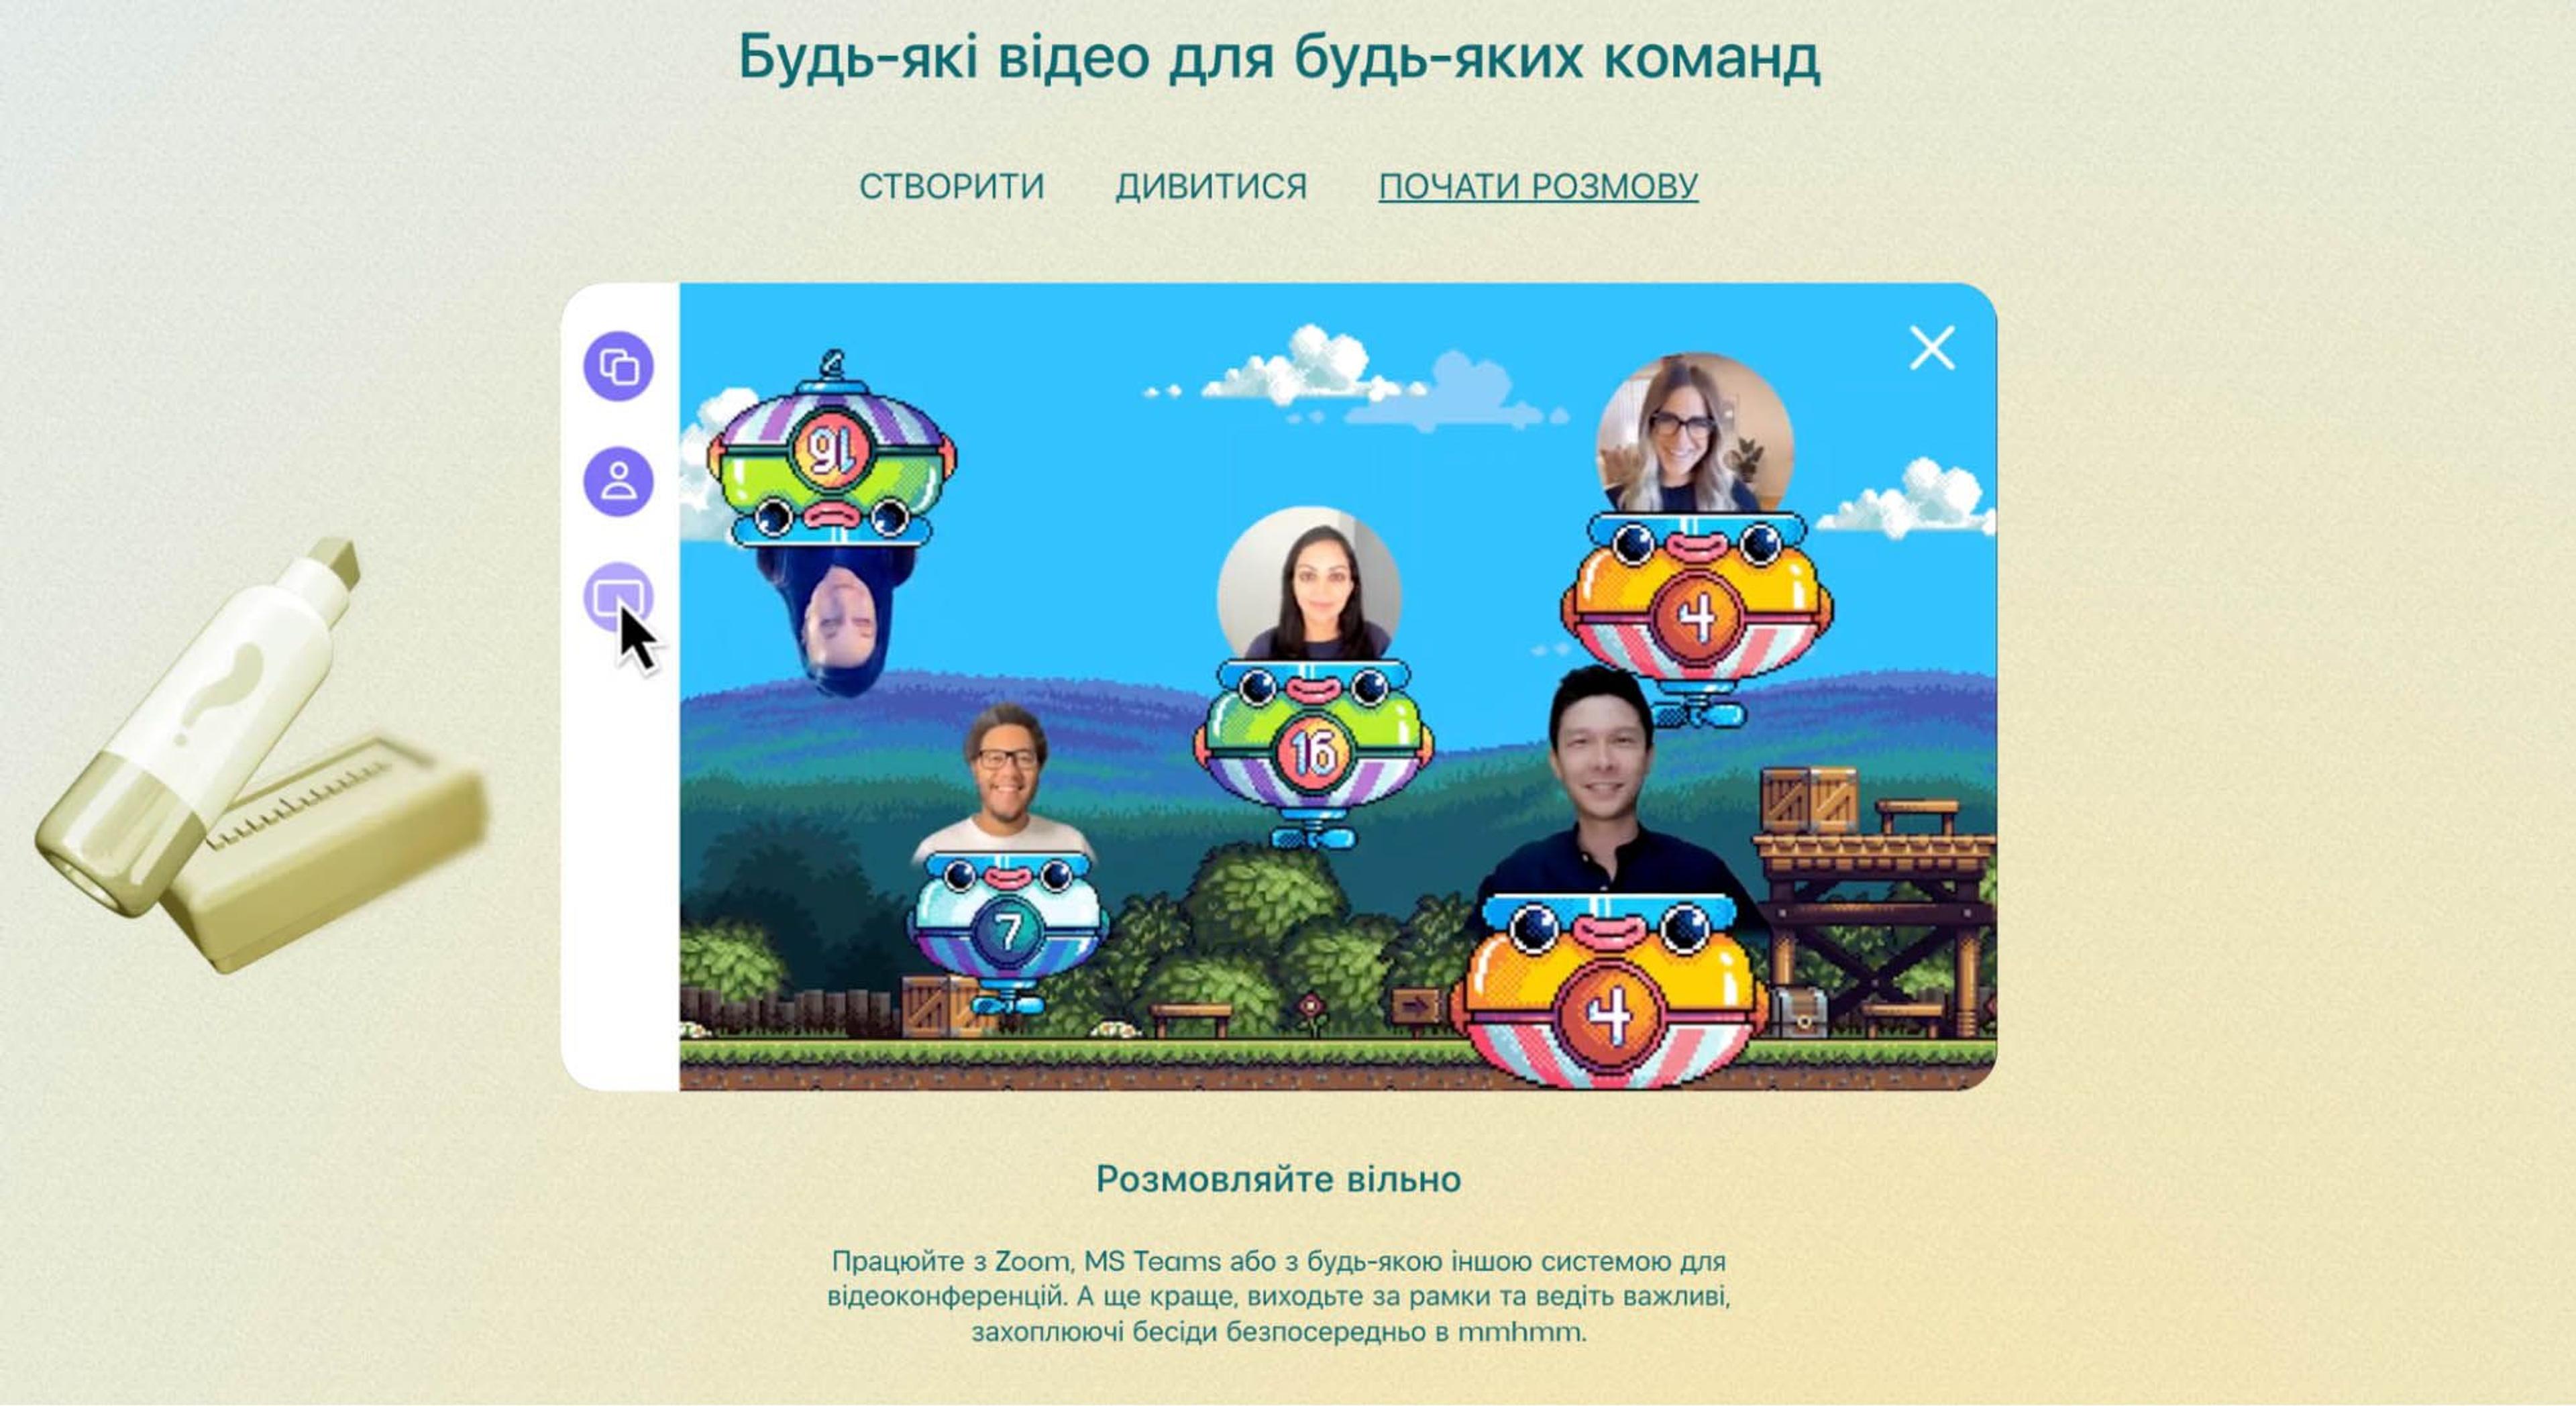 mmhmm website in Ukrainian, showing a video with users in digital floating bumper cars